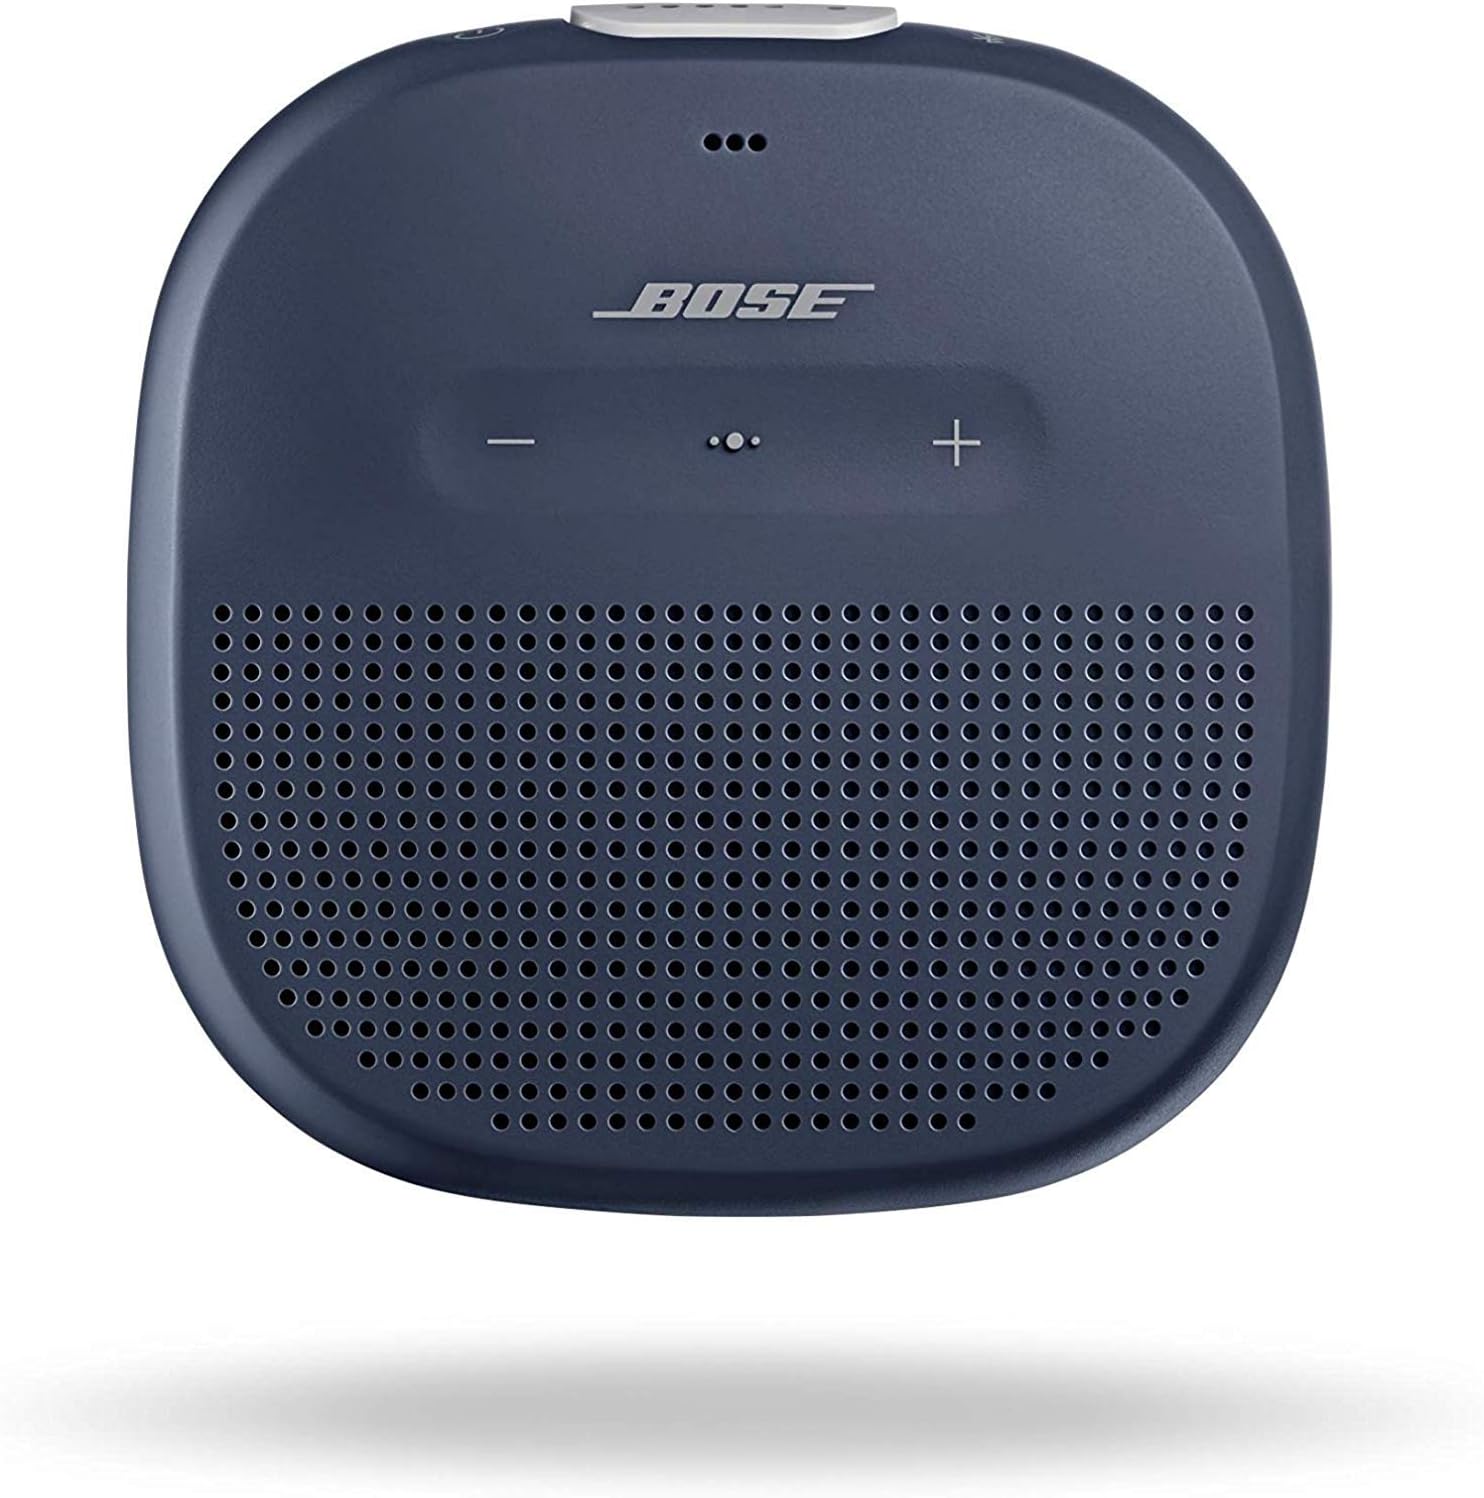 Bose Speakers: Your Gateway to Audio Perfection